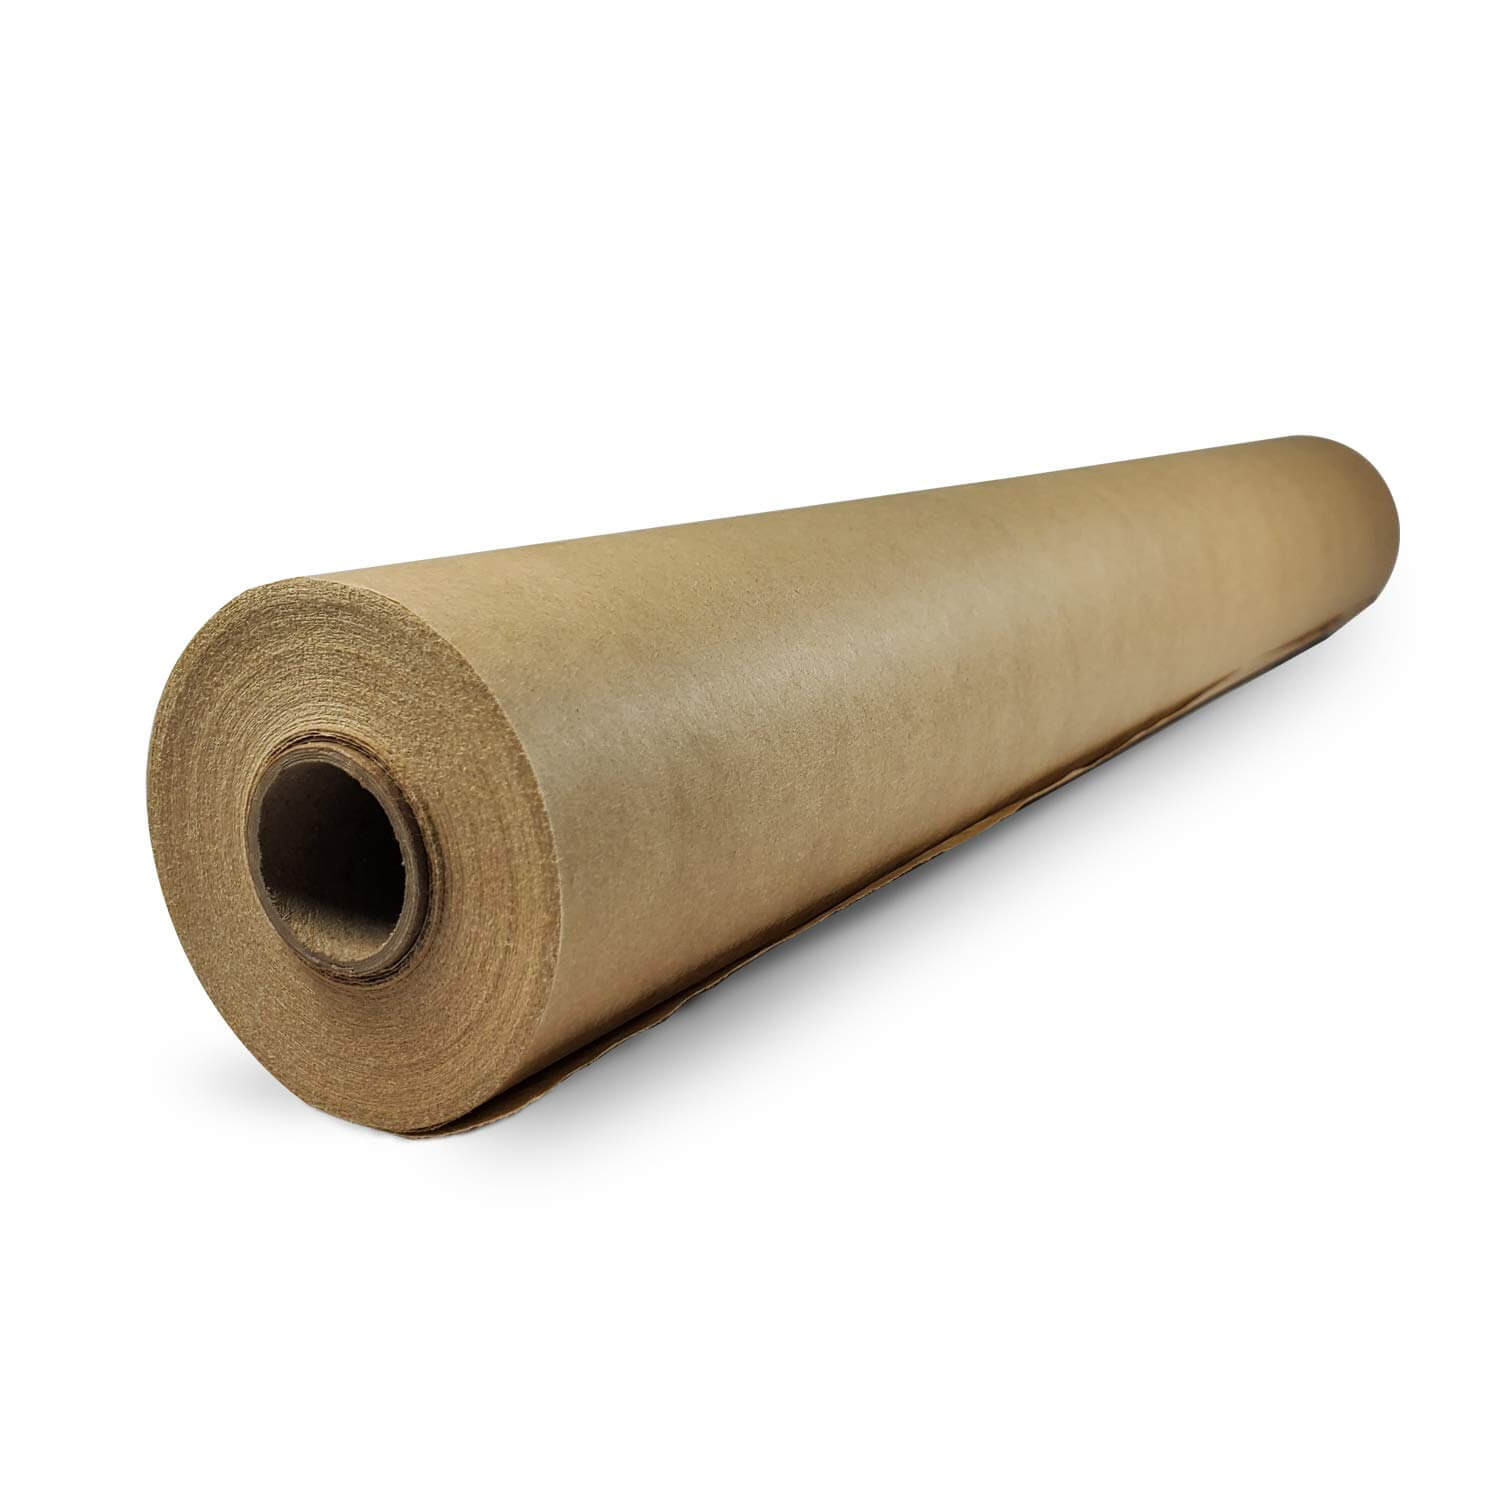 Masking Cover Set 1 1/2x60 yd Masking Painters Tape Roll and 9x60 yd  Masking Kraft Paper Roll with Masking Dispenser buy in stock in U.S. in IDL  Packaging